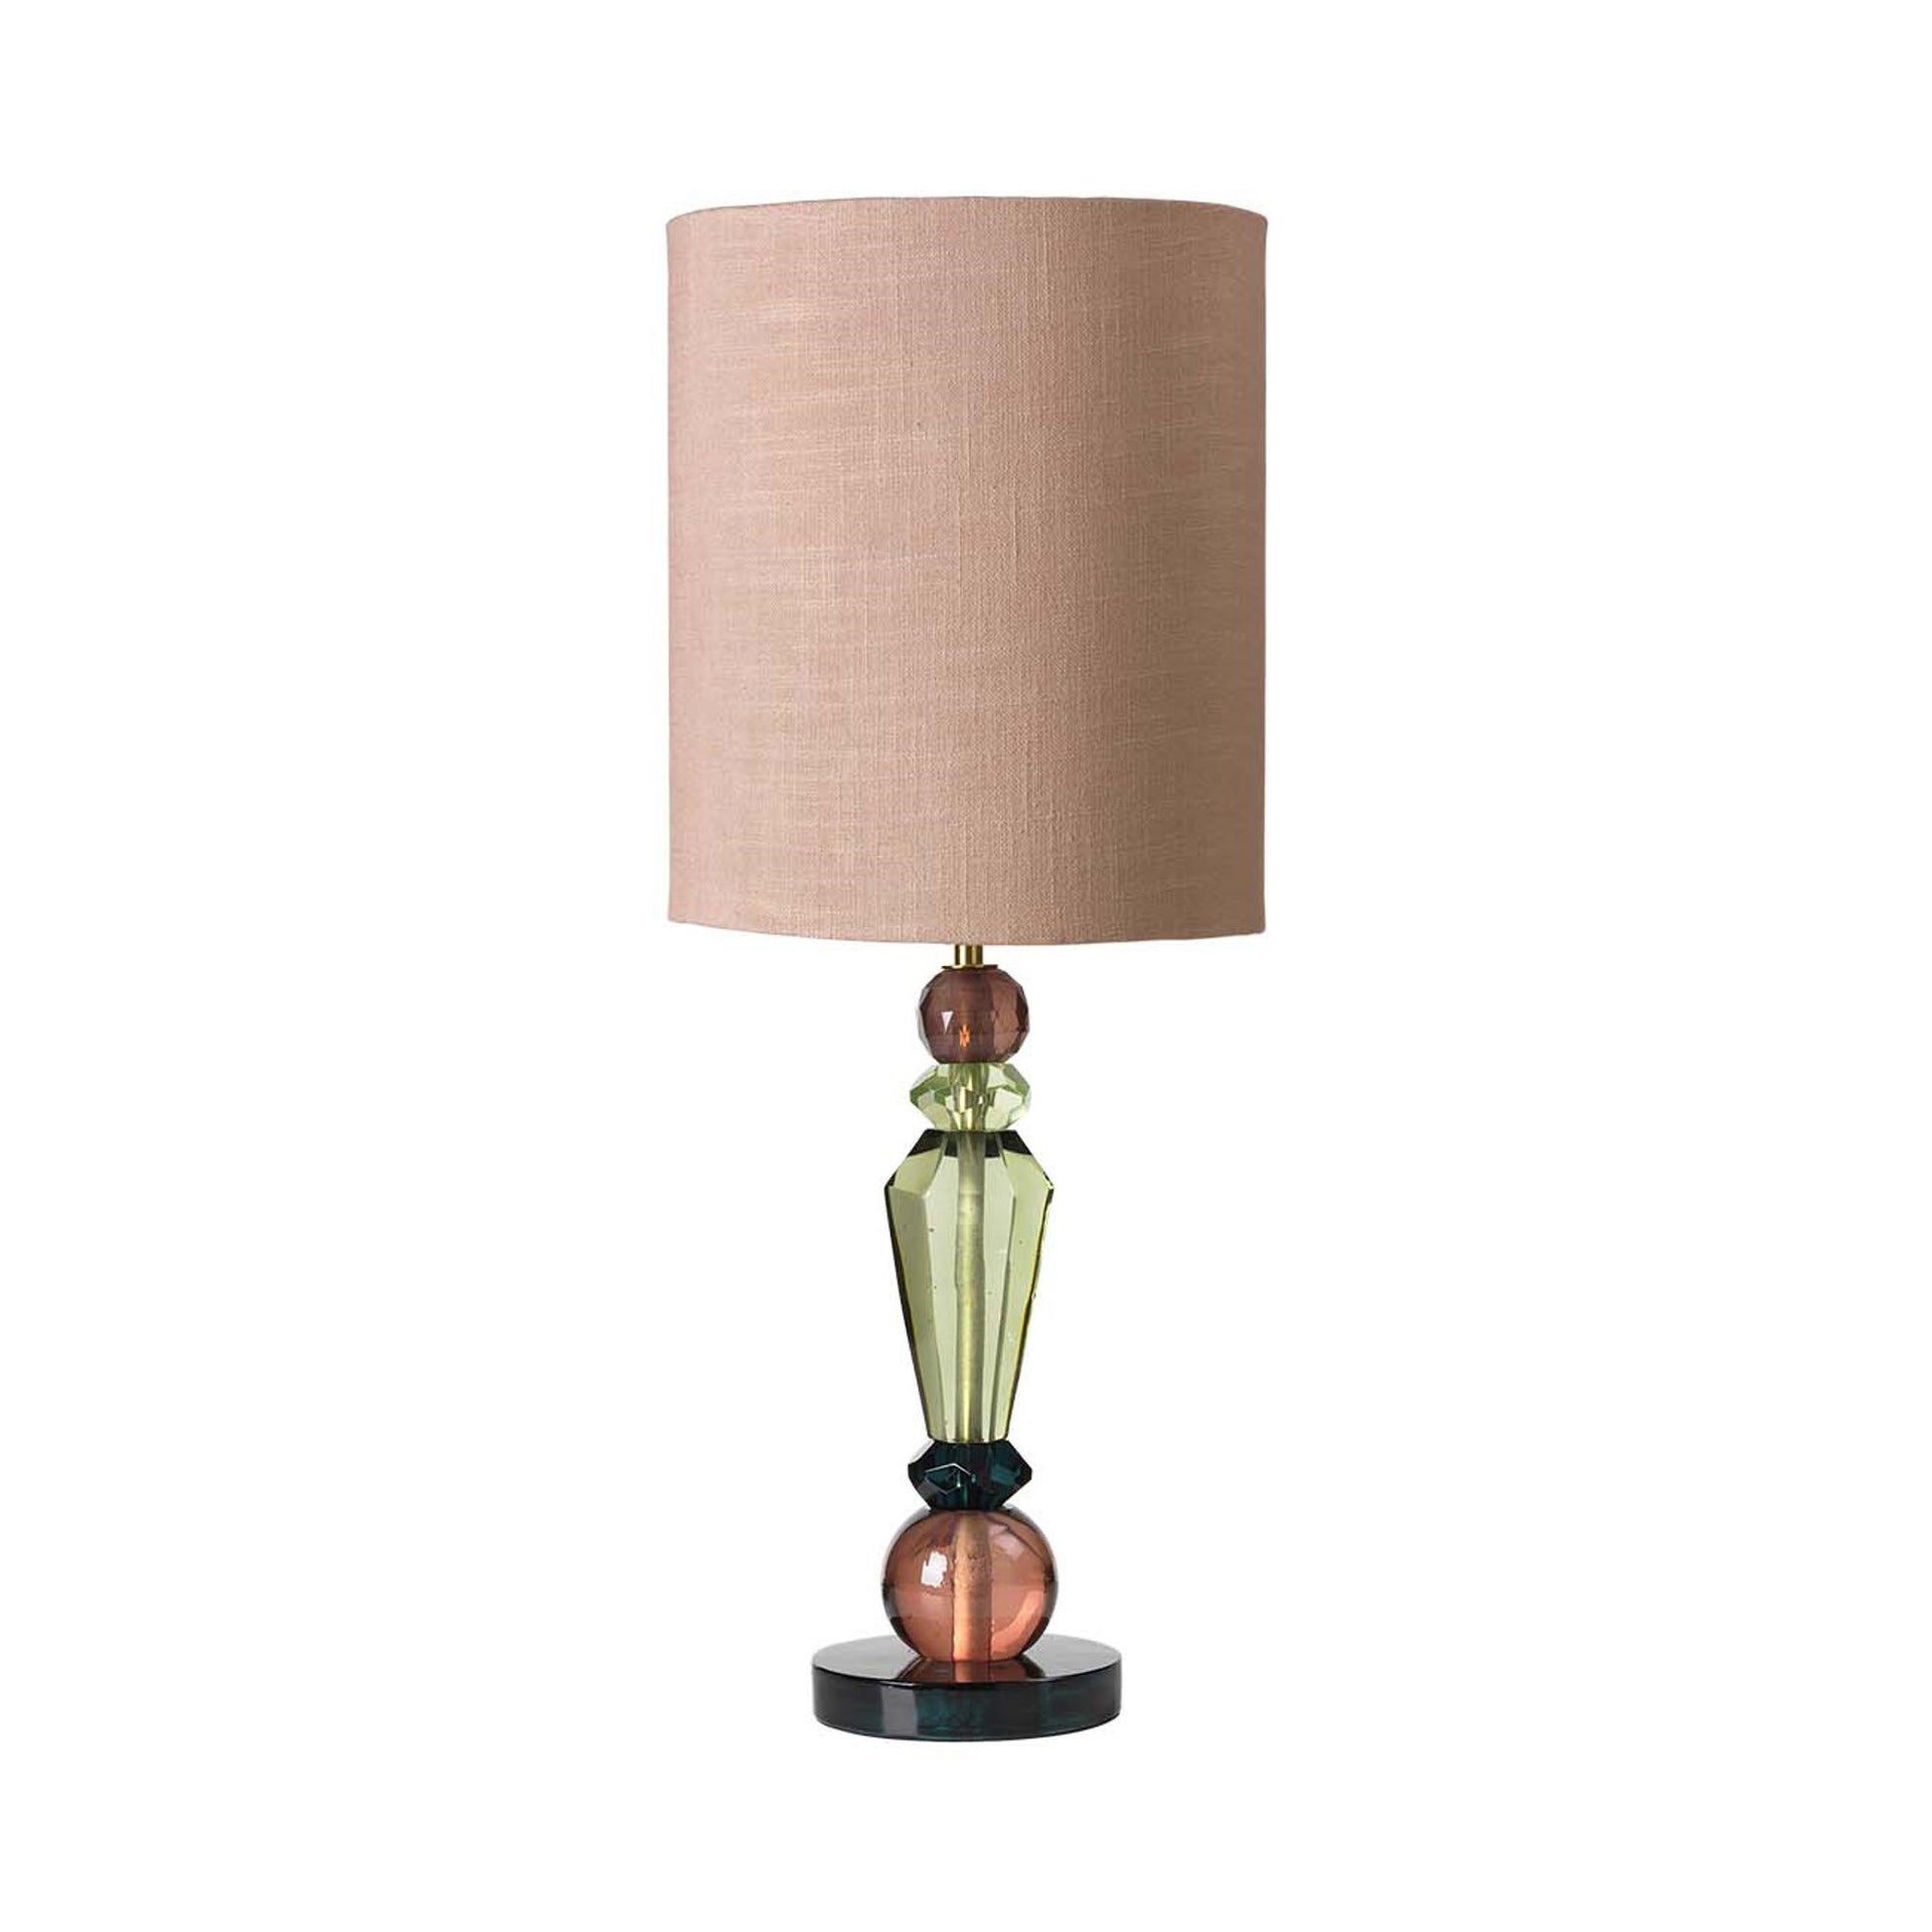 Caia Table Lamp by Cozy Living #Matcha/Dusty Rose